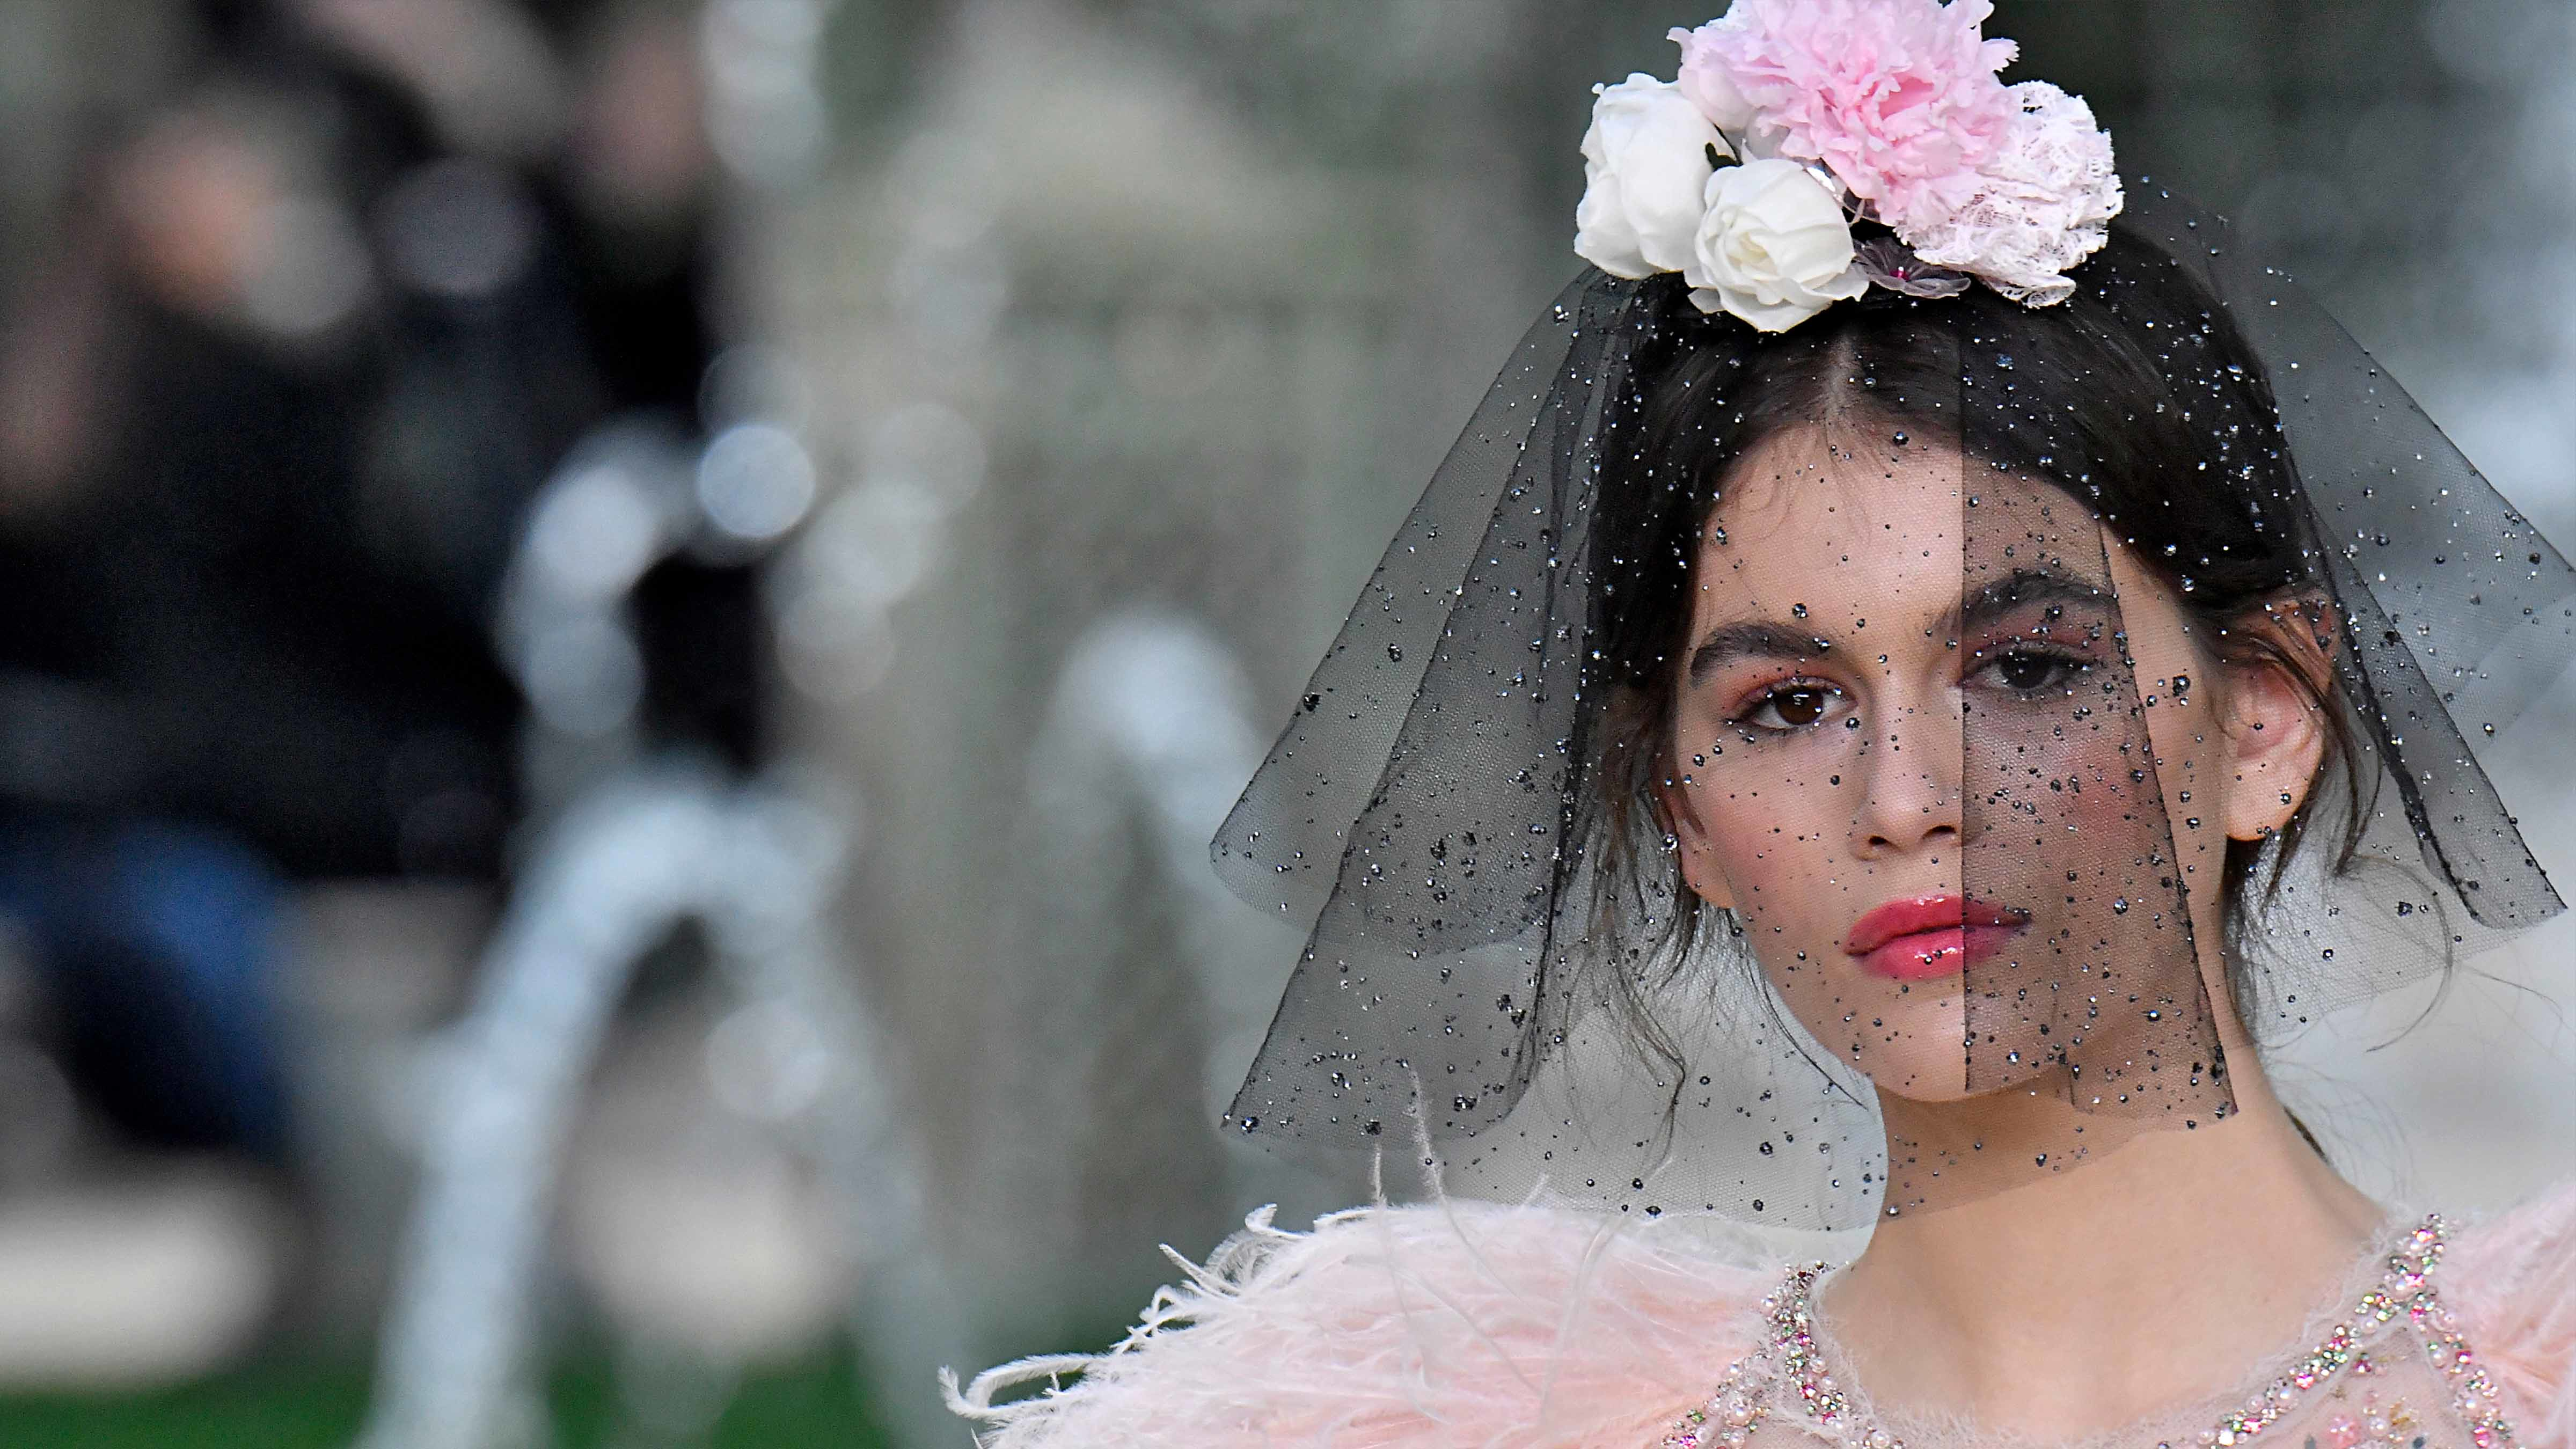 Kaia Gerber First Chanel Campaign - Karl Lagerfeld Photographs Kaia Gerber  in Chanel Spring 2018 Campaign